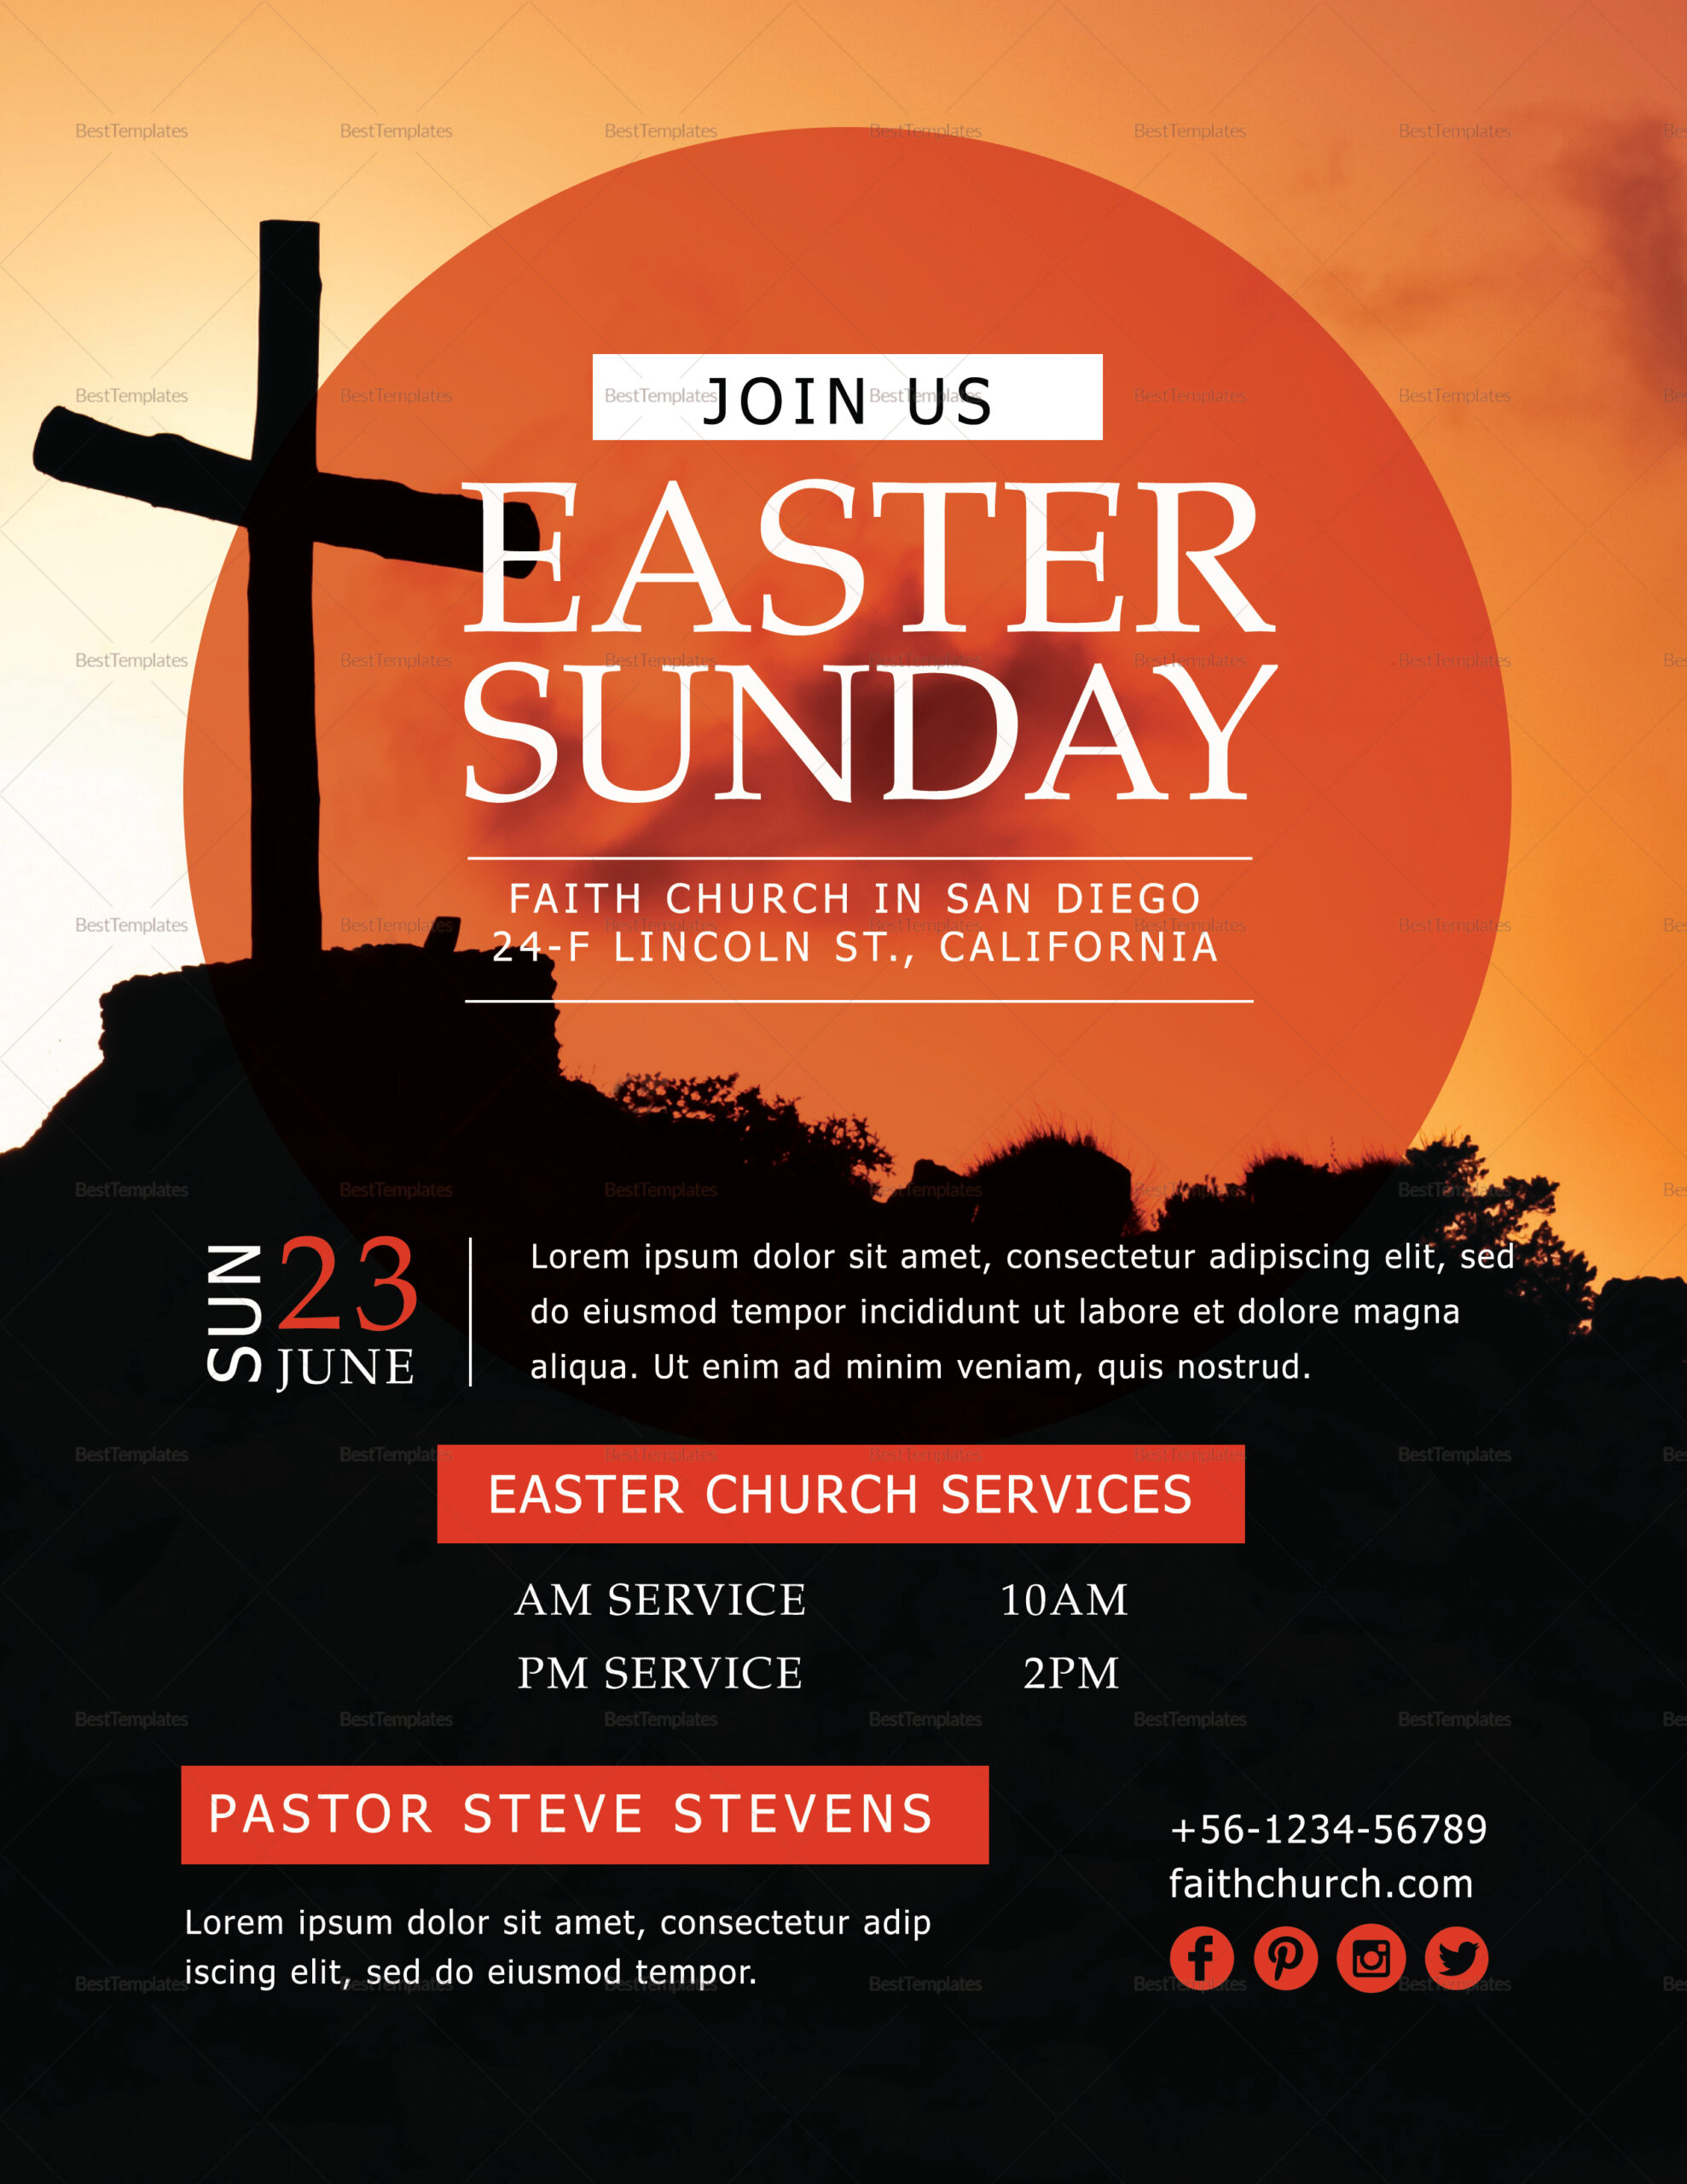 Easter Sunday Flyer Template With Regard To Easter Church Flyer Template Inside Easter Church Flyer Template